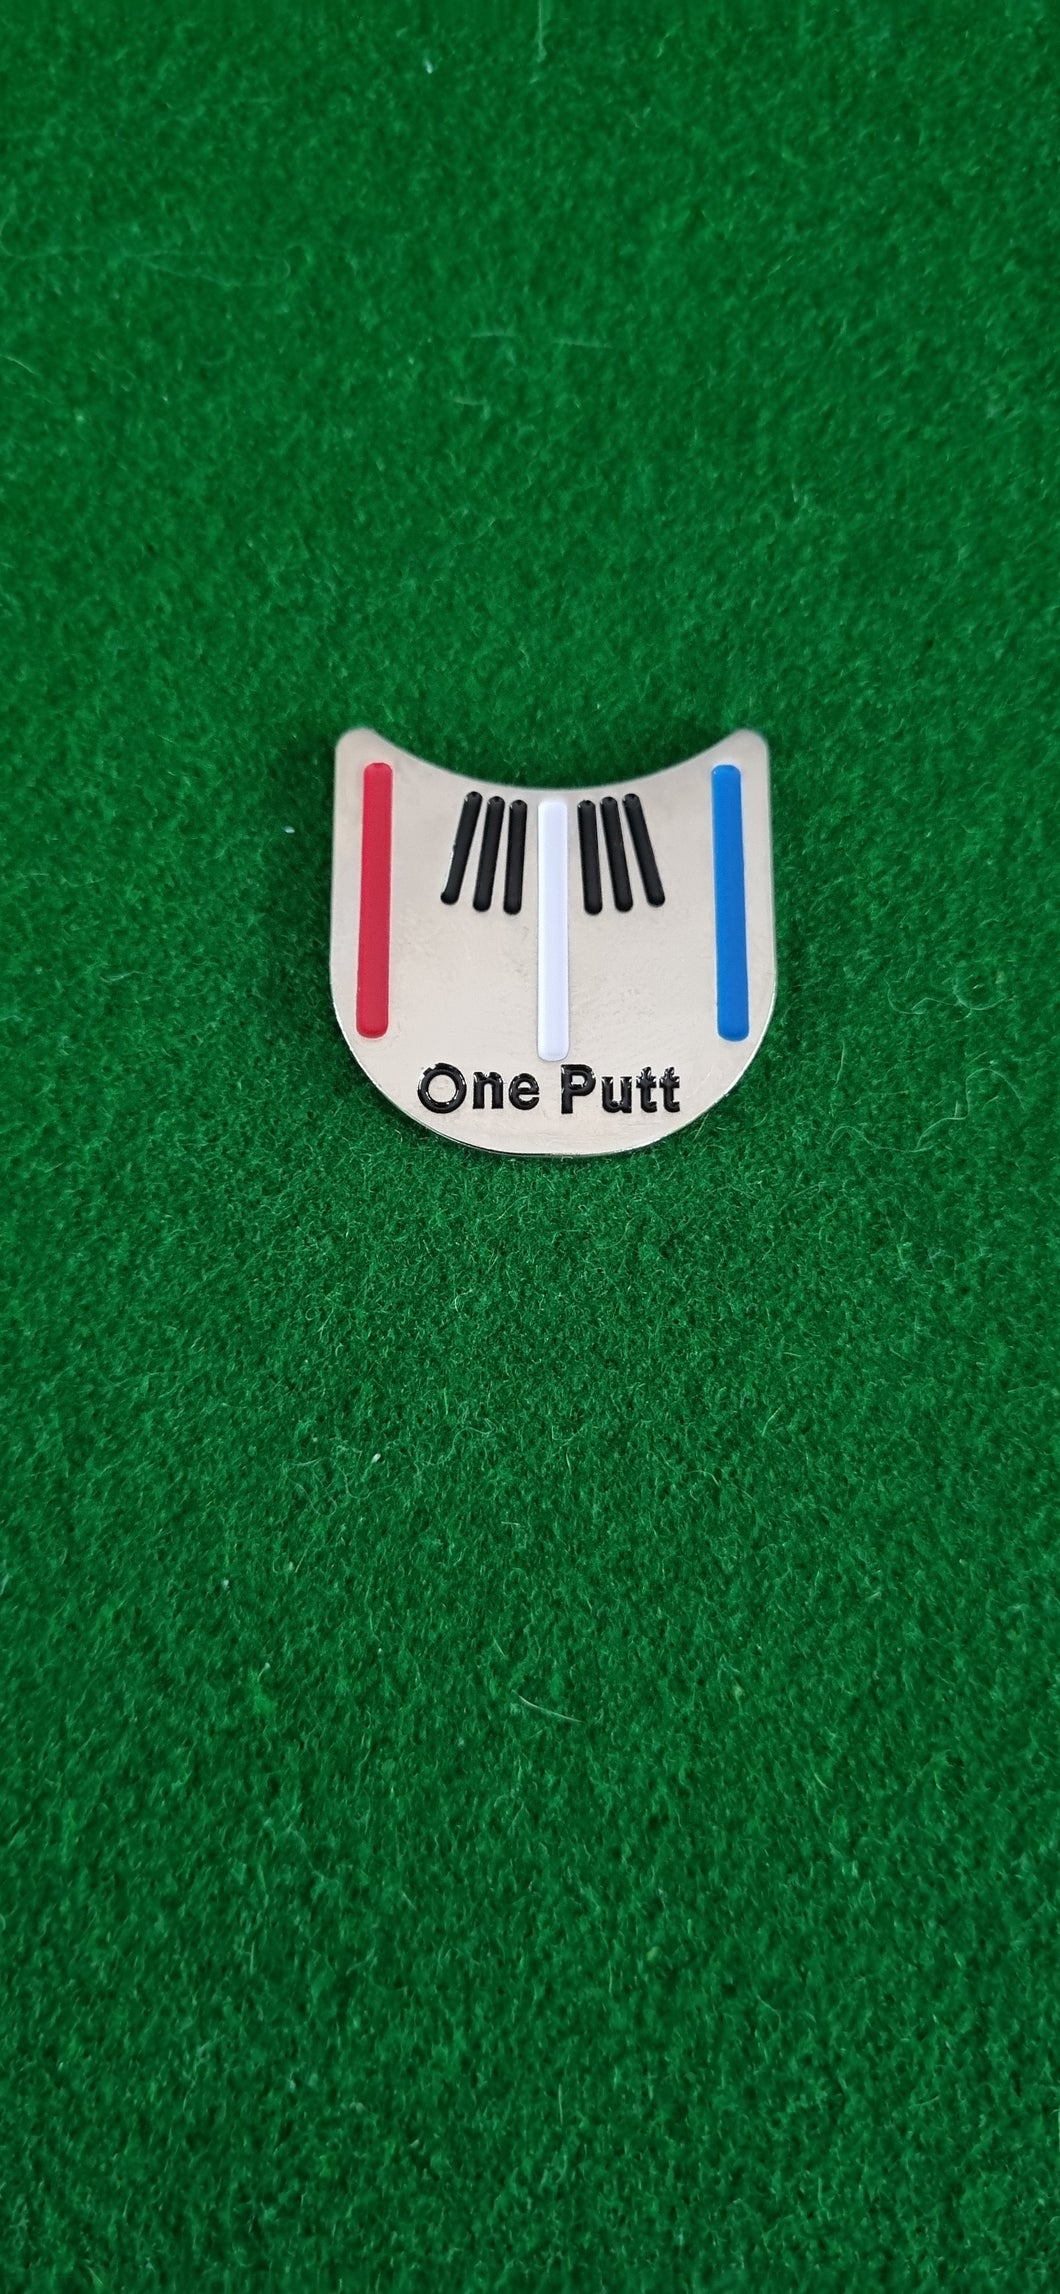 Golf Ball Marker with Magnetic Hat Clip - One Putt - New